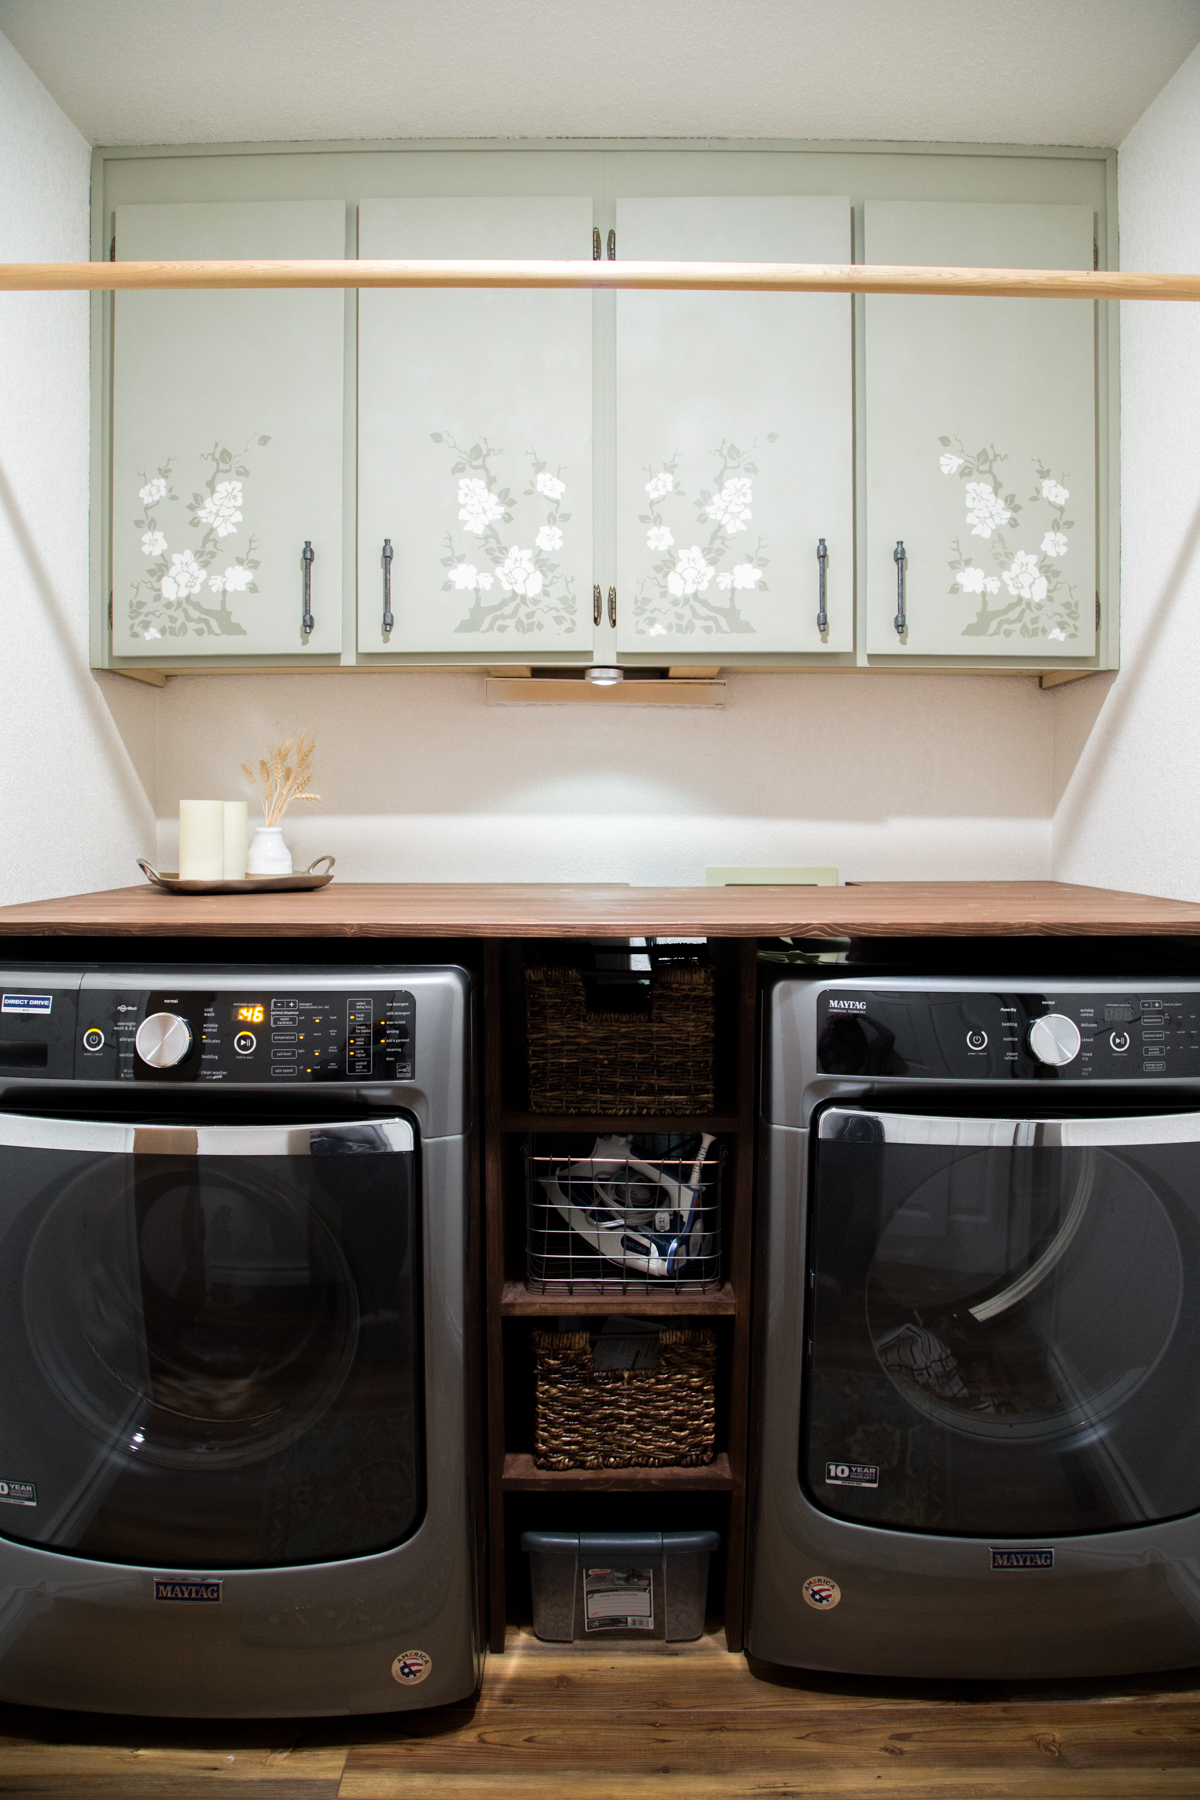 Laundry Room Final Reveal With Maytag, How To Build A Countertop Over Washer And Dryer